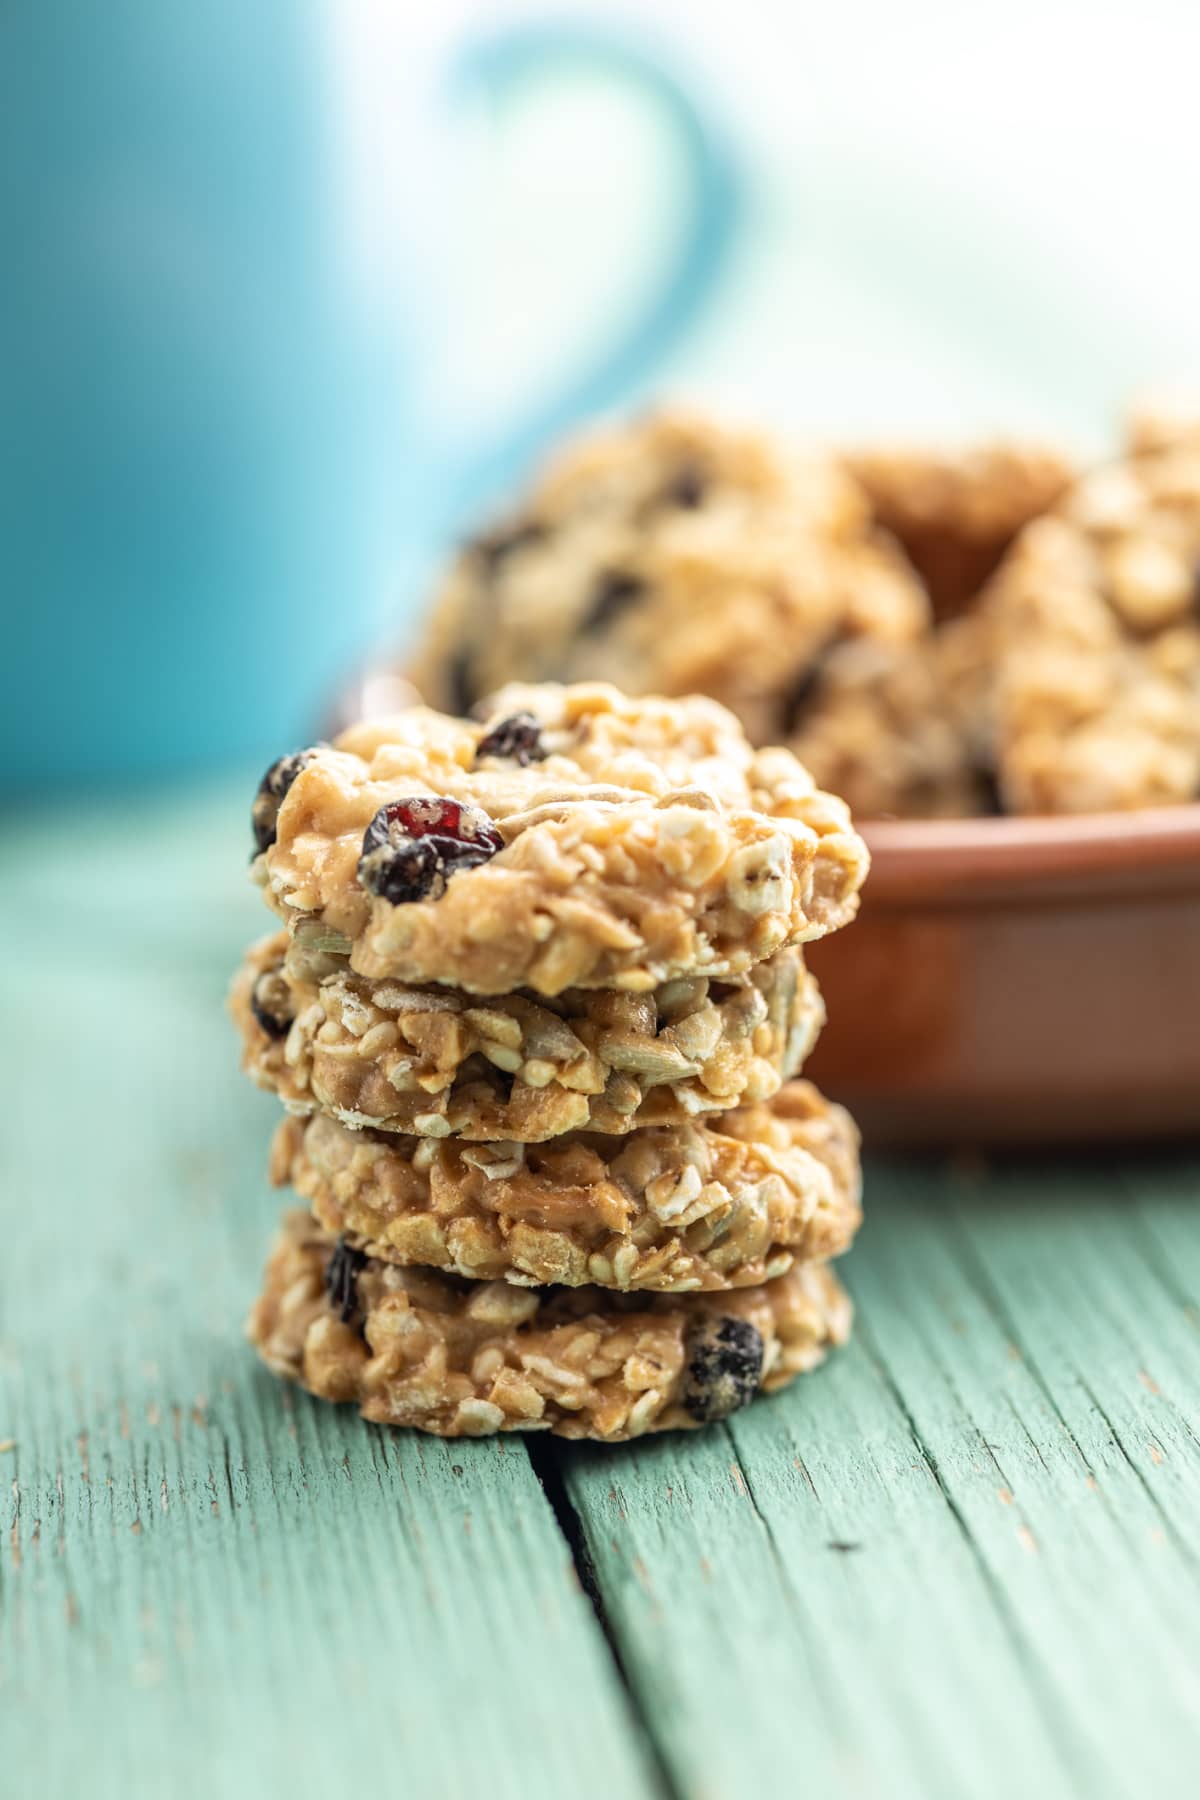 Wholegrain oat cookies. Cookies with oatmeal and raisins on the green wooden table.